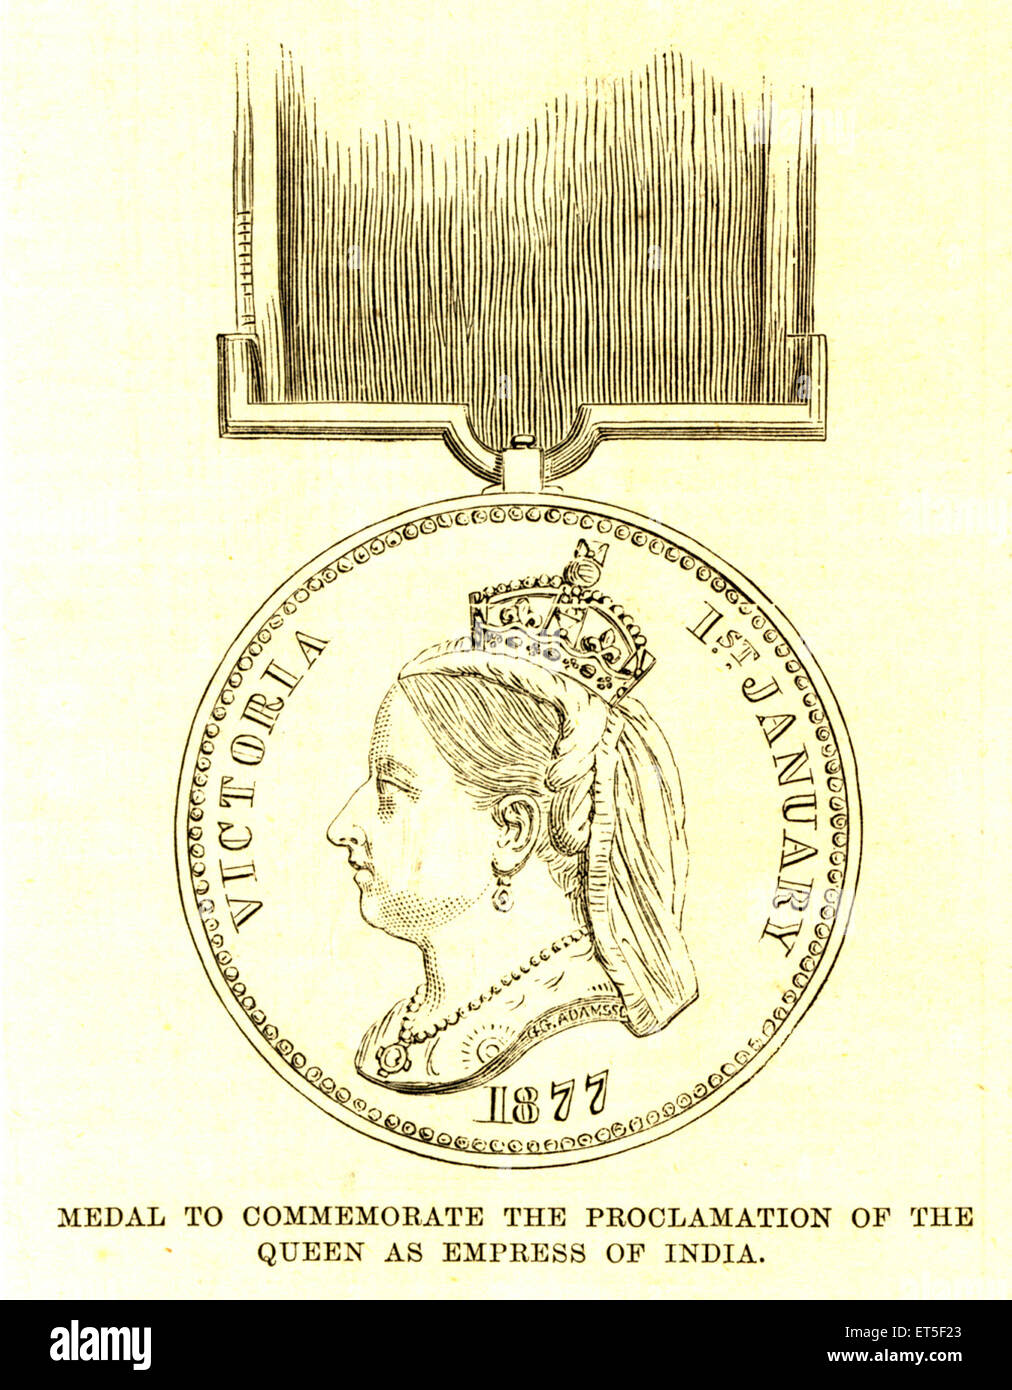 Medal to commemorate proclamation of the Queen as Empress of India, 1877, old vintage 1800s steel engraving Stock Photo